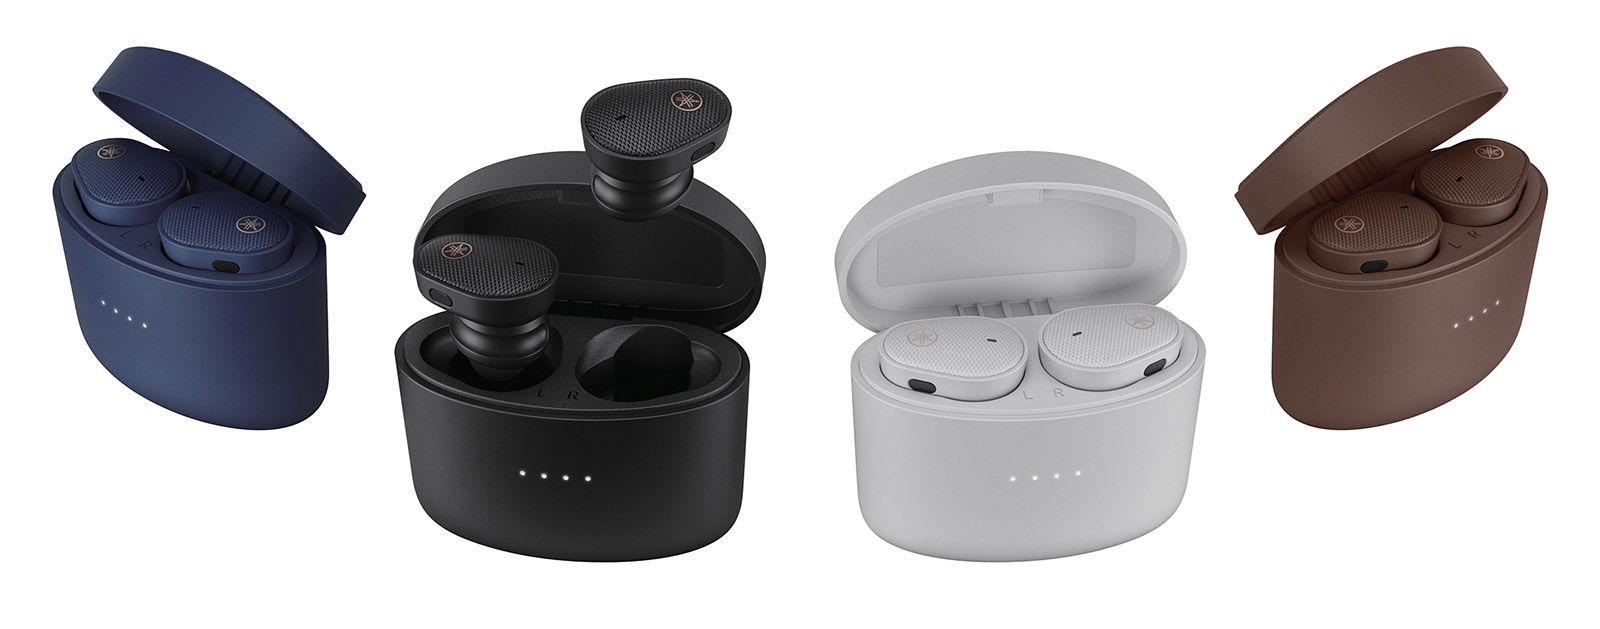 Yamaha TW-E5B true wireless earbuds are designed to perform at low volumes photo 2